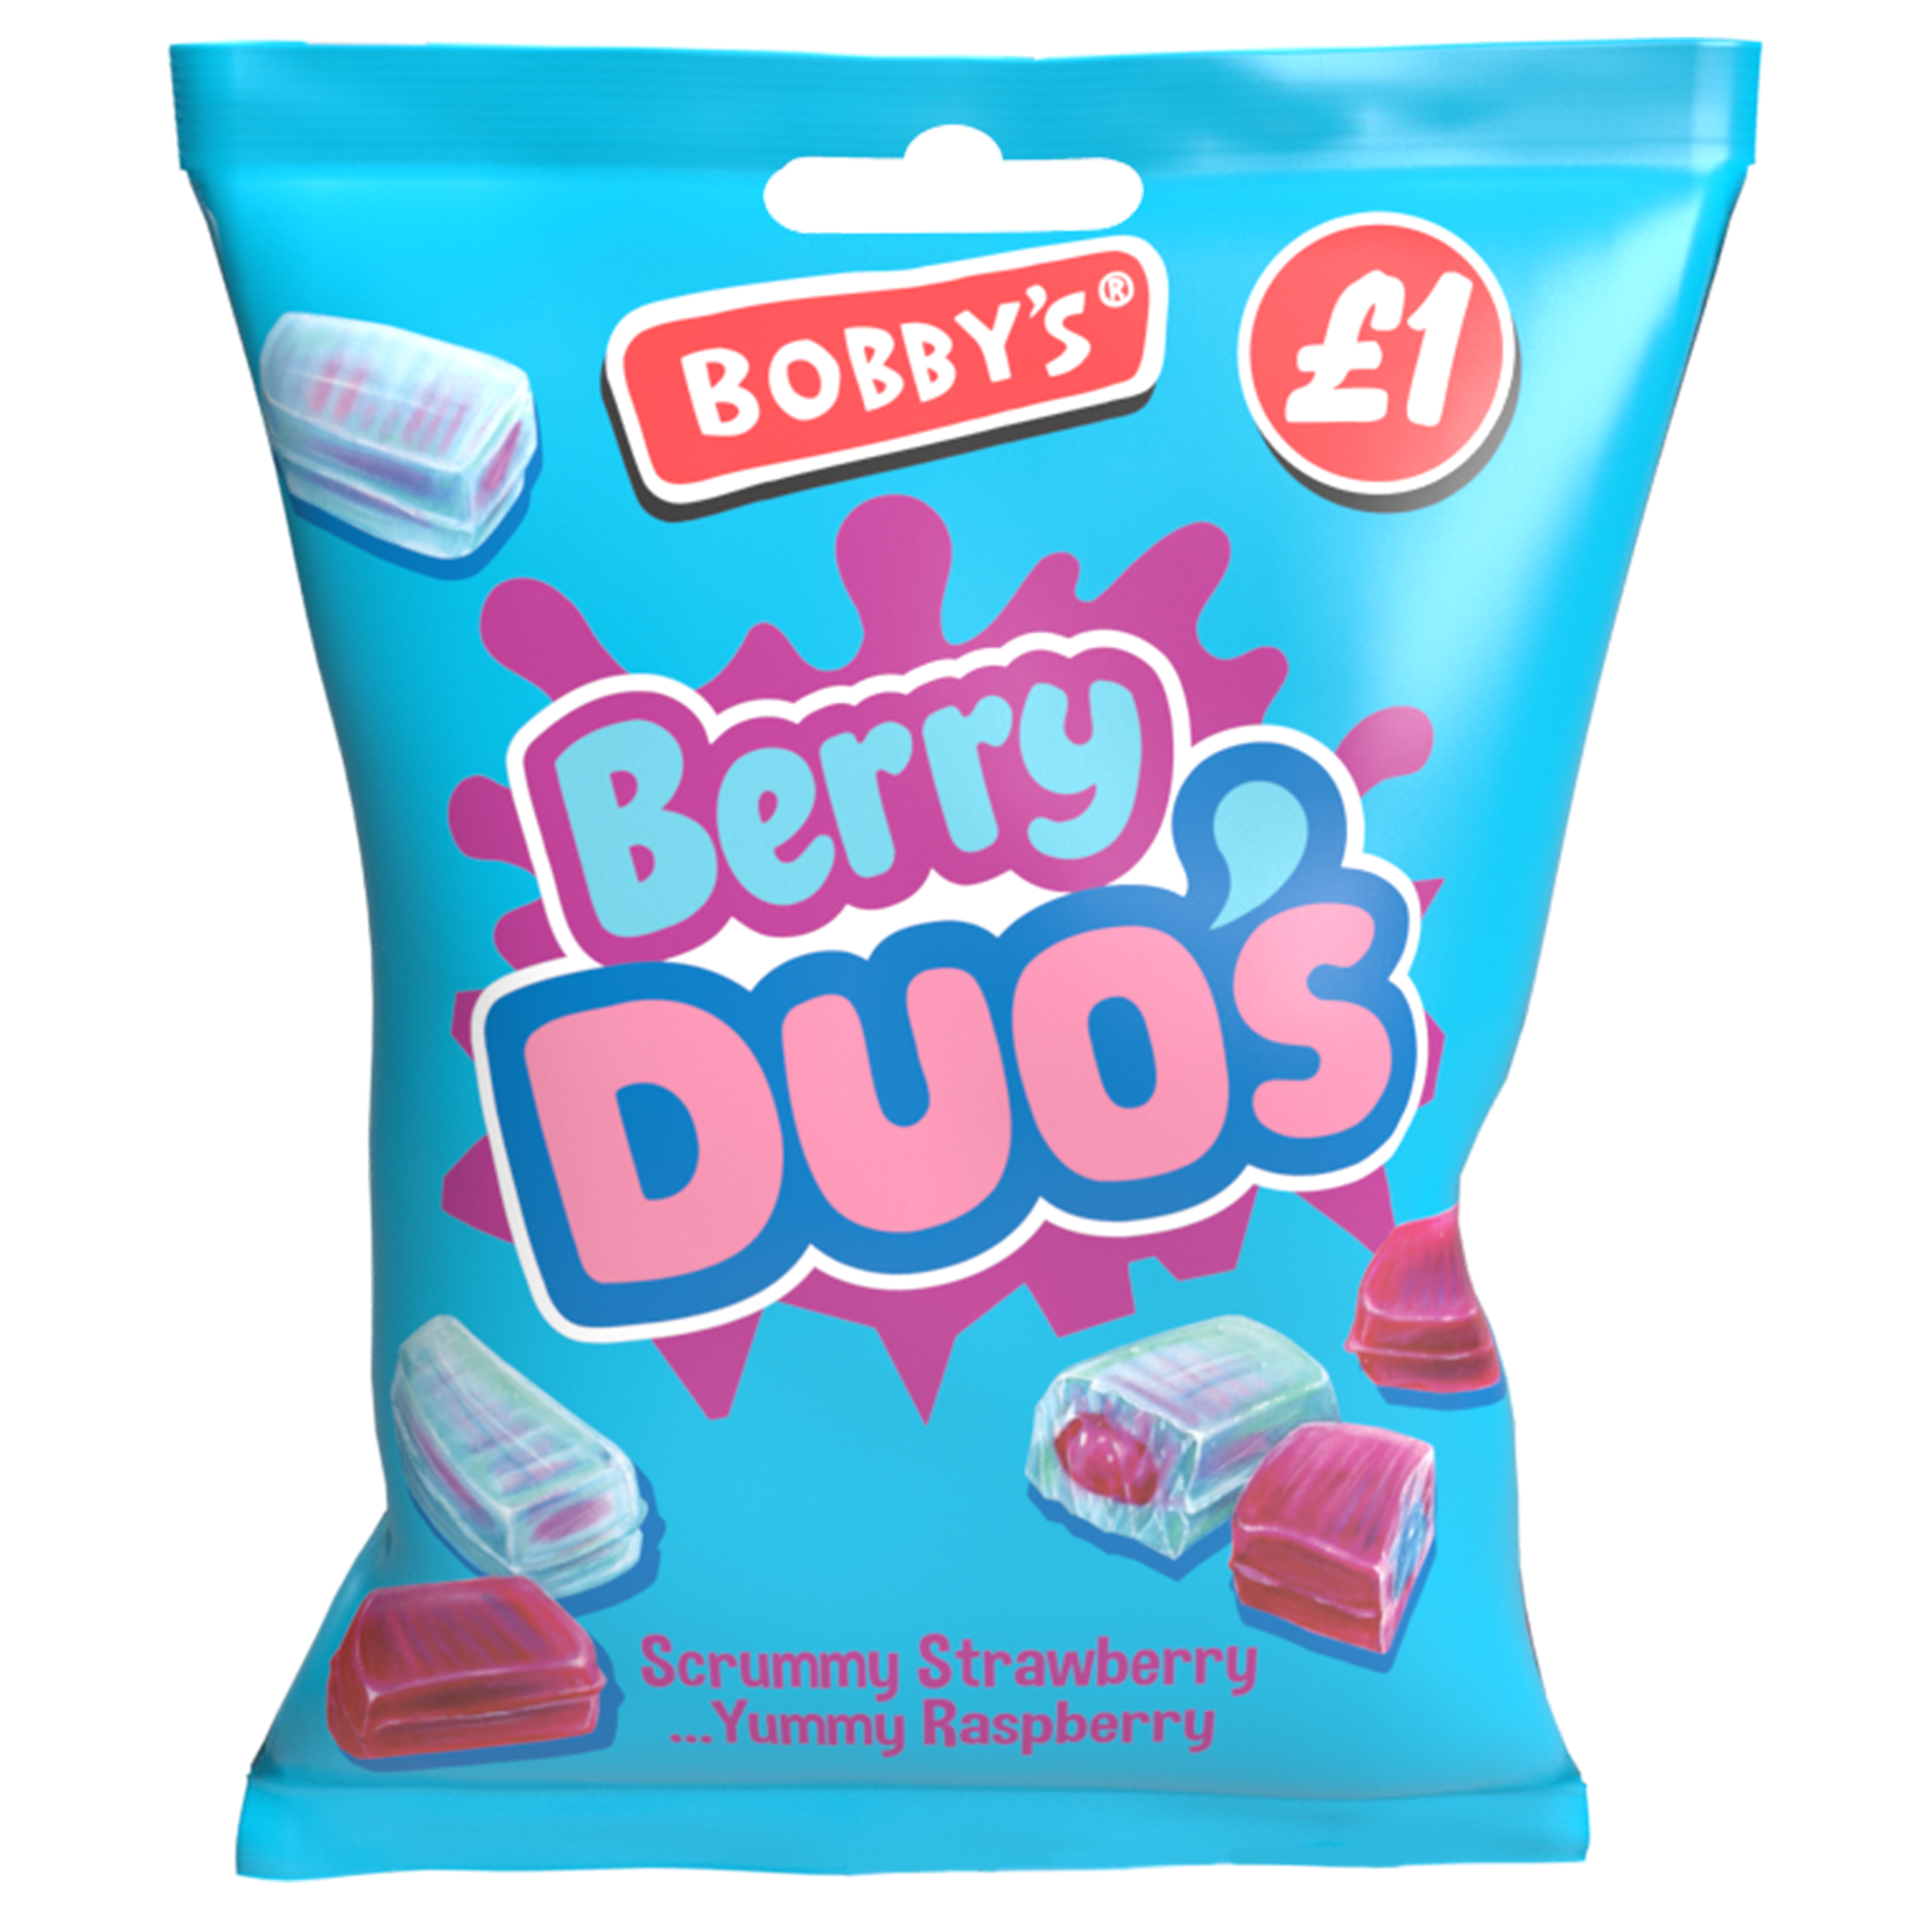 ‘Bag’ some sweet sales with new Bobby’s launch